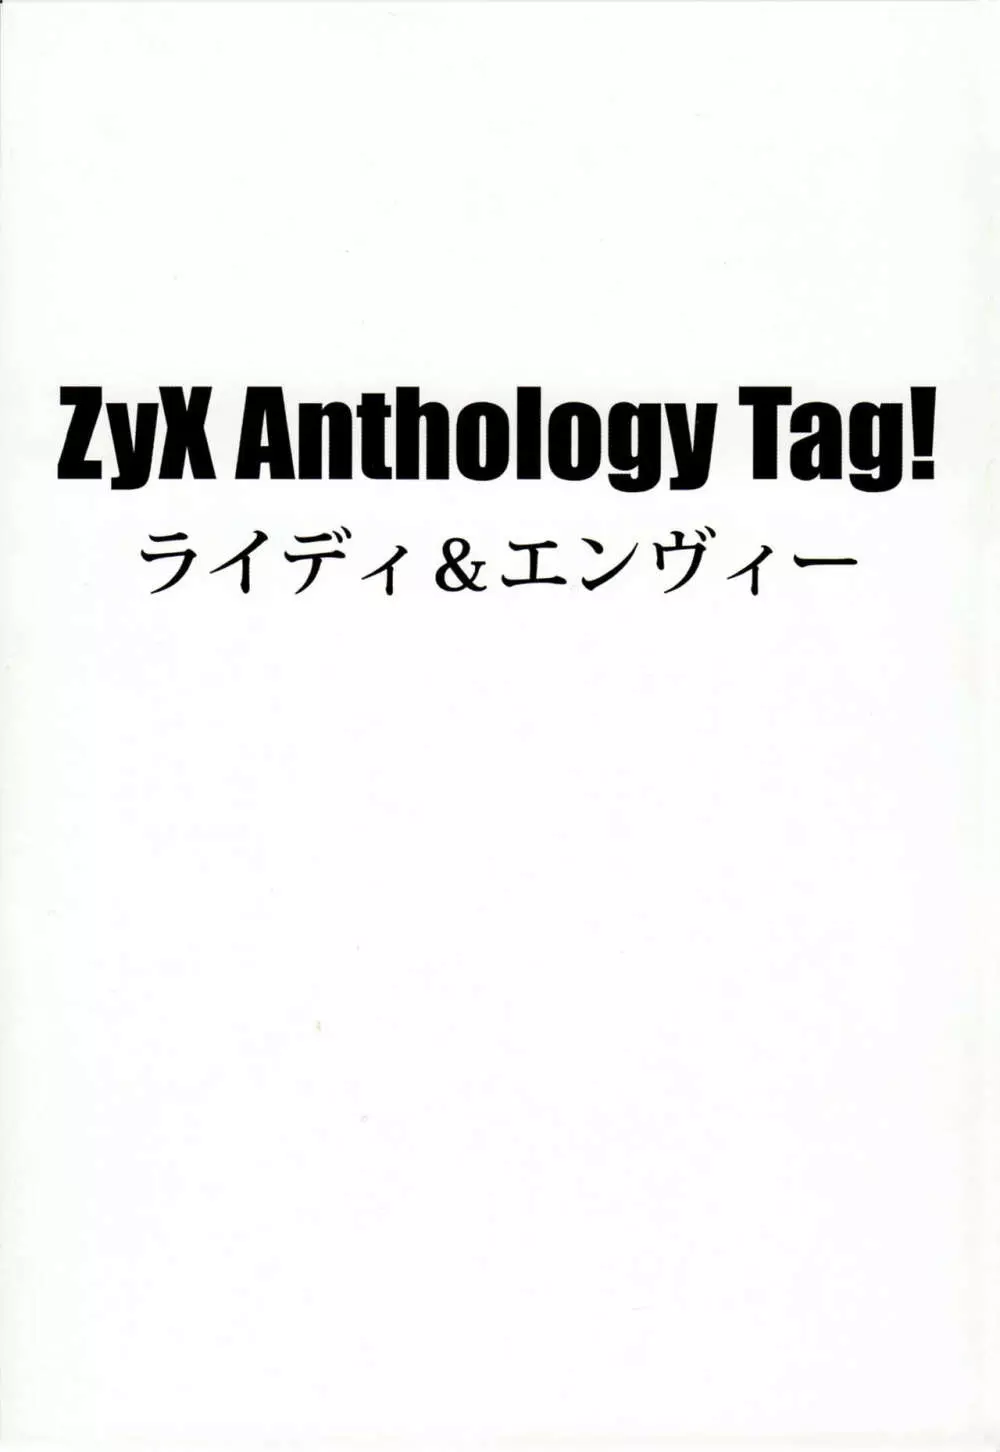 ZyX Anthology Tag! ライディ＆エンヴィー Page.6